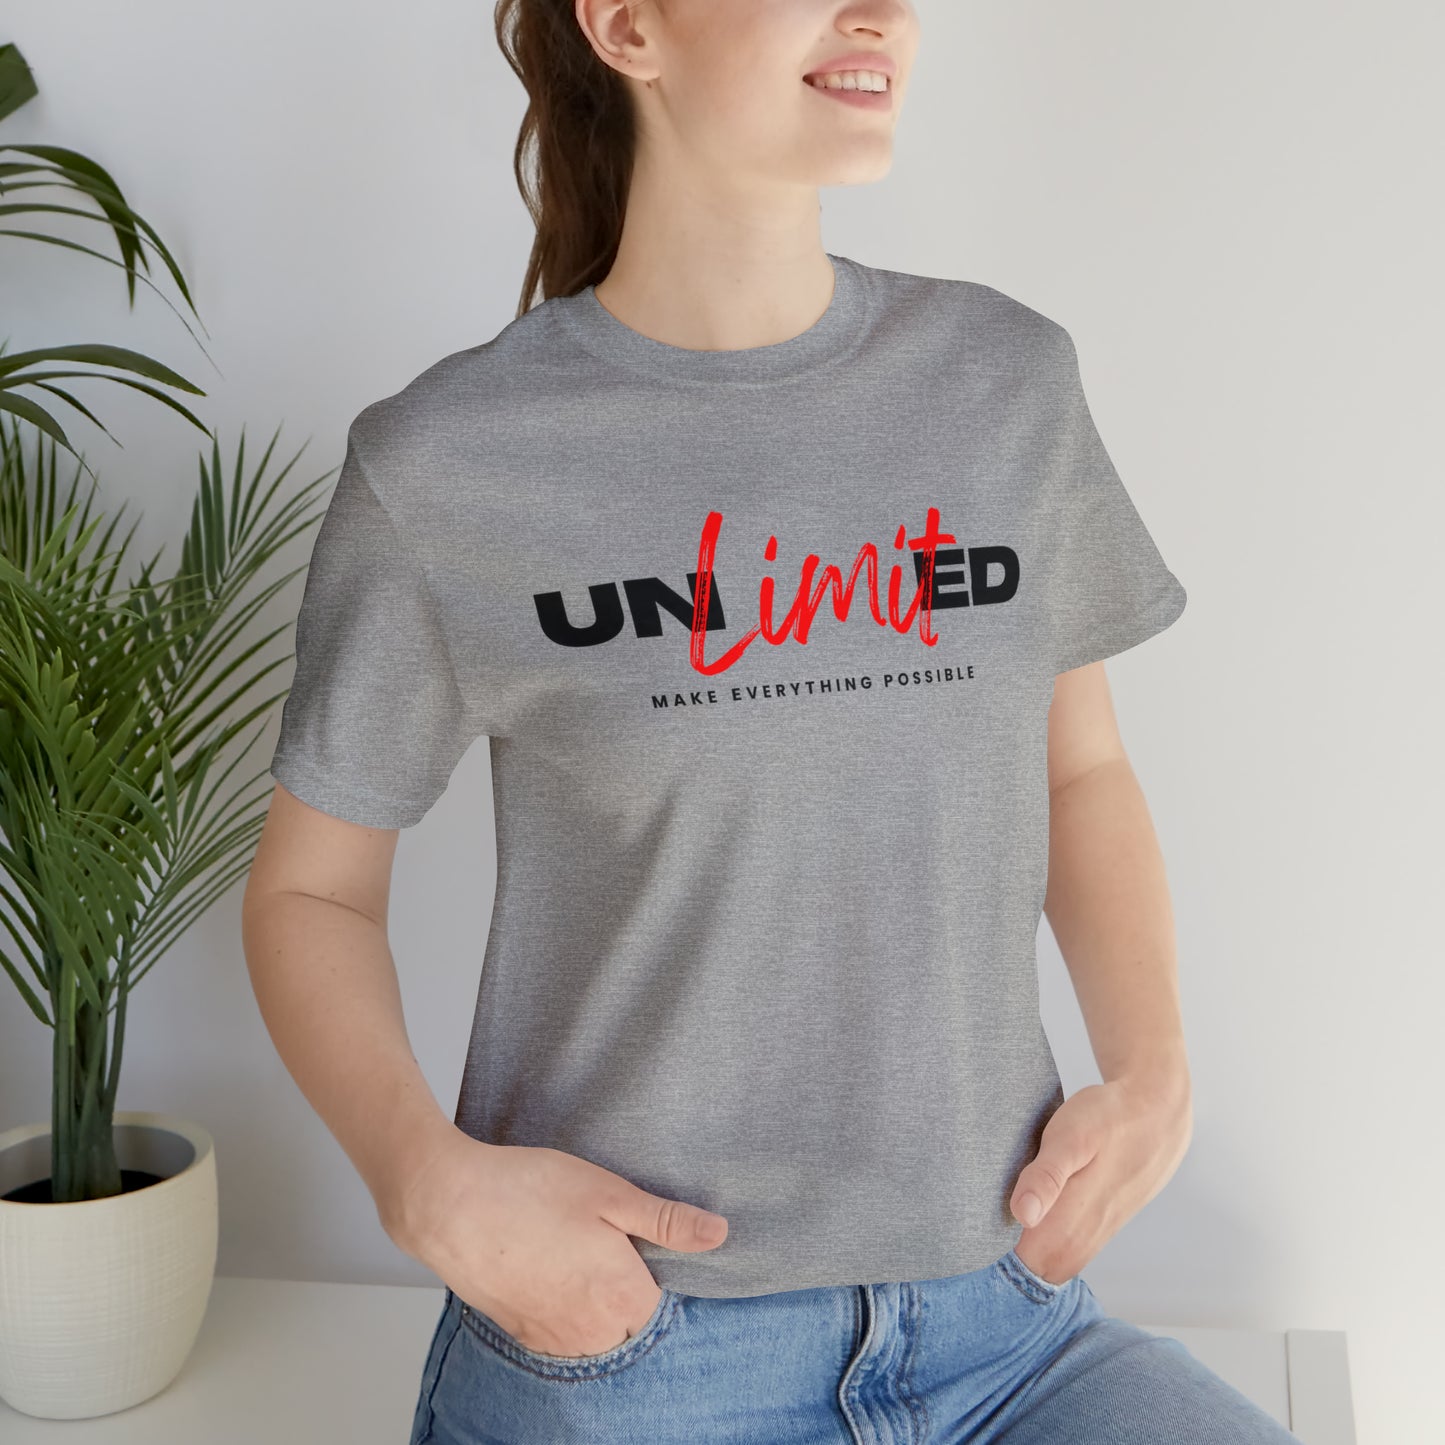 Unlimited Make Everything Possible Women's T-shirt